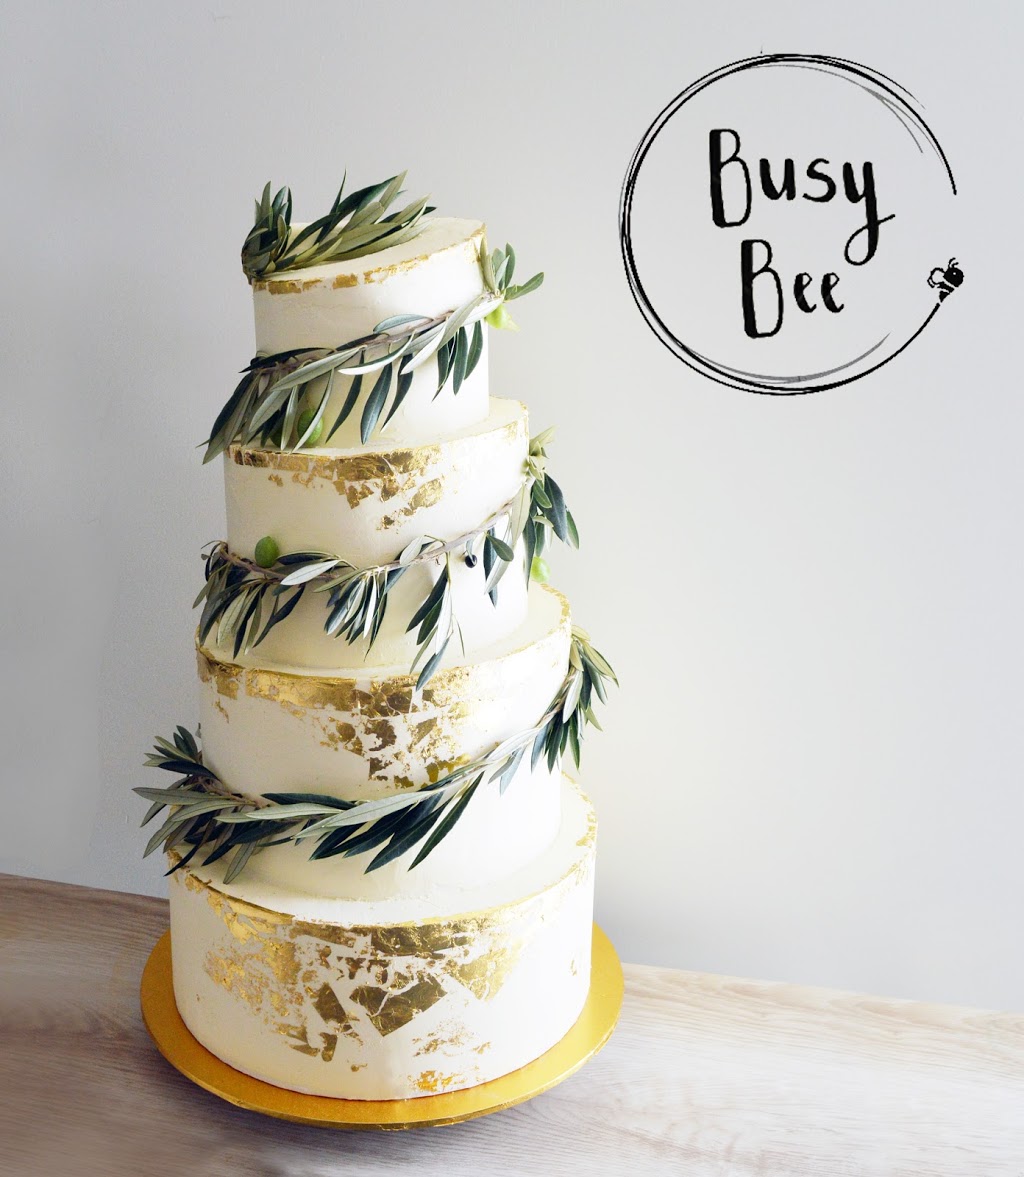 Busy Bee Cakes and Cupcakes | bakery | Boardwalk Blvd, Point Cook VIC 3030, Australia